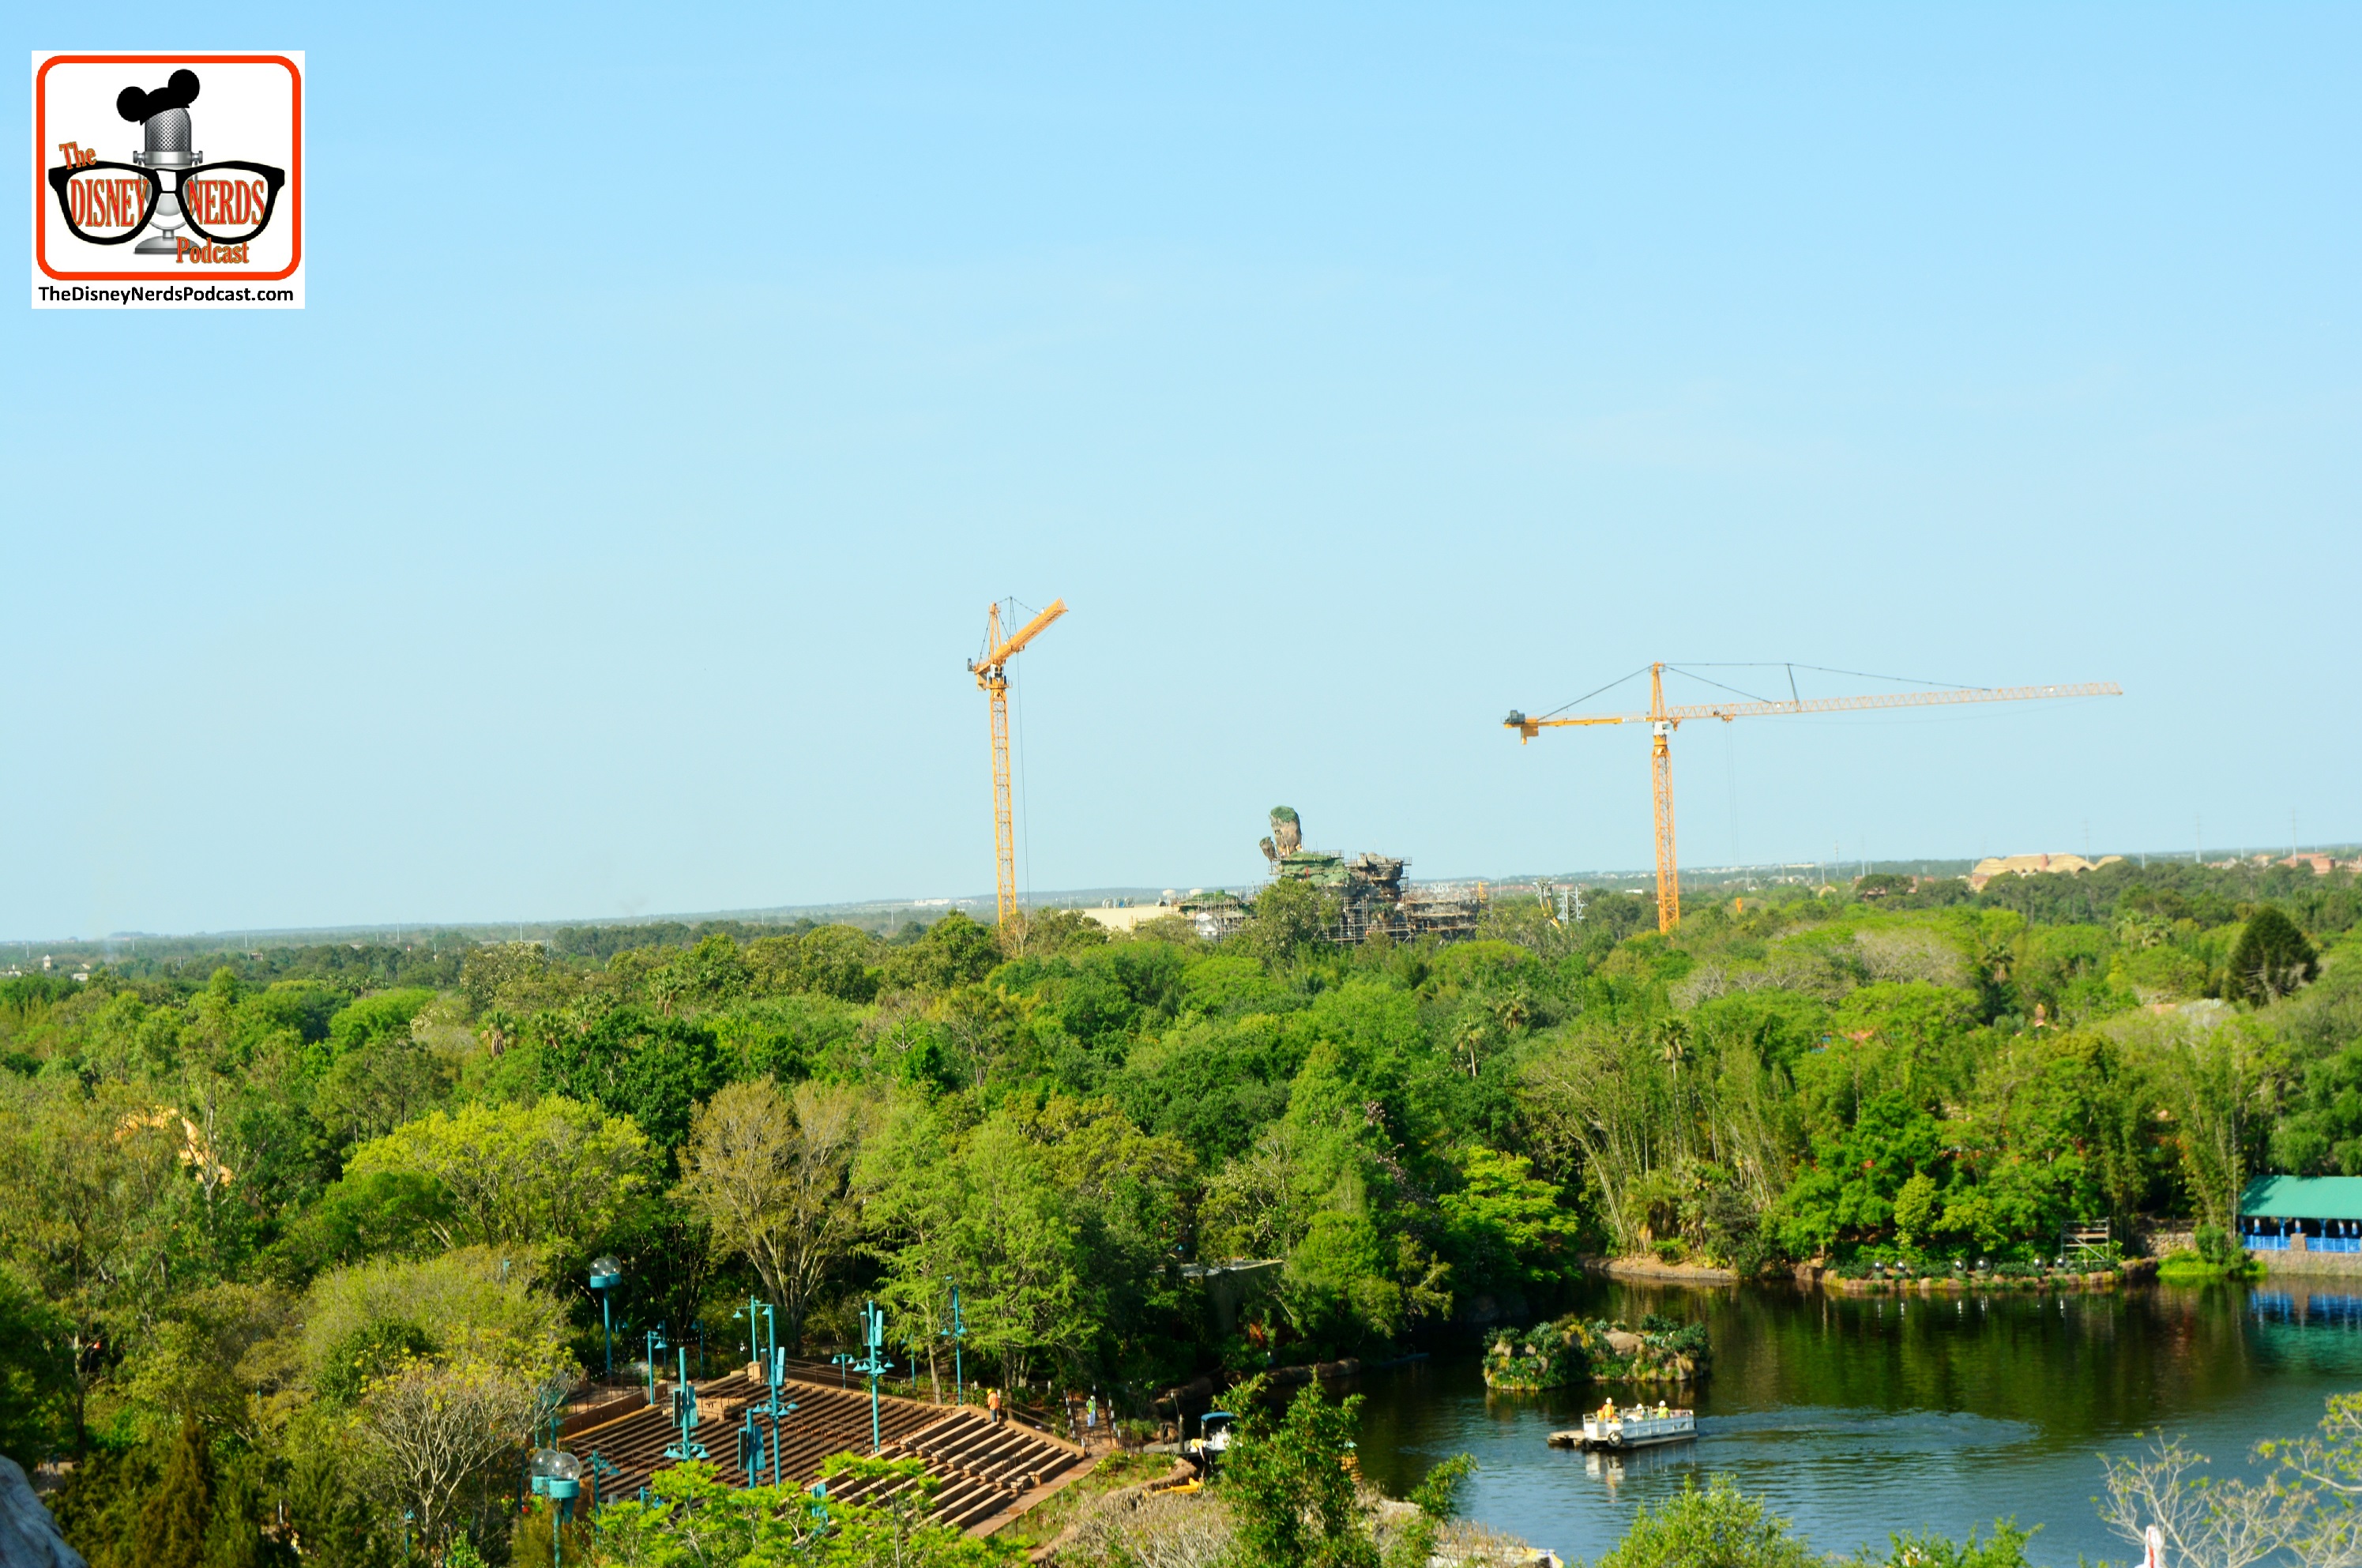 DNP April 2016 Photo Report: Animal Kingdom: Avitarland Construction from the top of Everest.